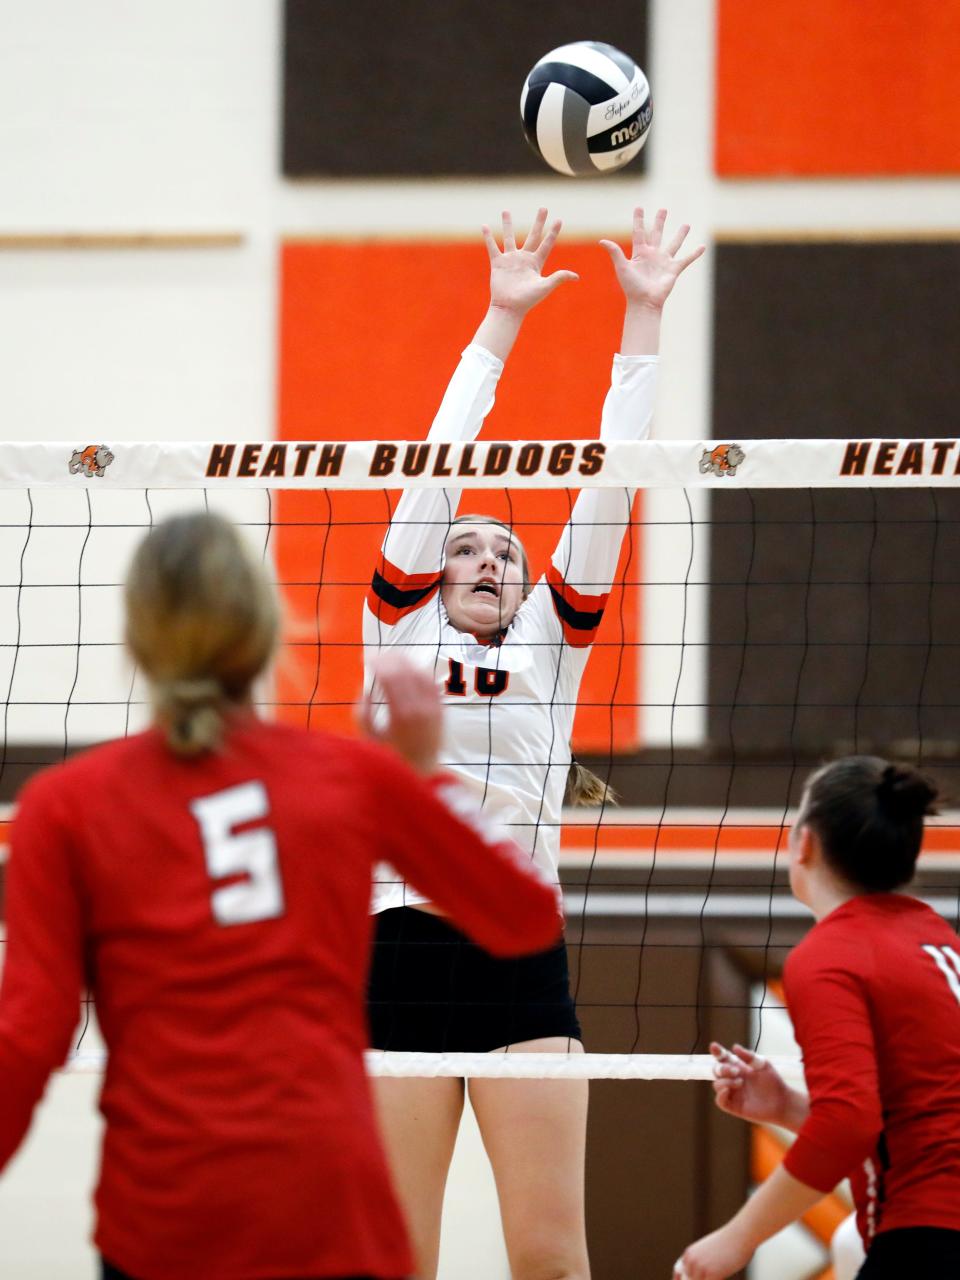 Abby Wilson goes up for a block during New Lexington's 20-25, 21-25, 25-15, 22-25 loss to Belmont Union Local in a Division II regional final on Saturday at Heath High School. New Lex wrapped up a 22-6 season that included their first regional runner-up finish in school history and first district title since 1983.